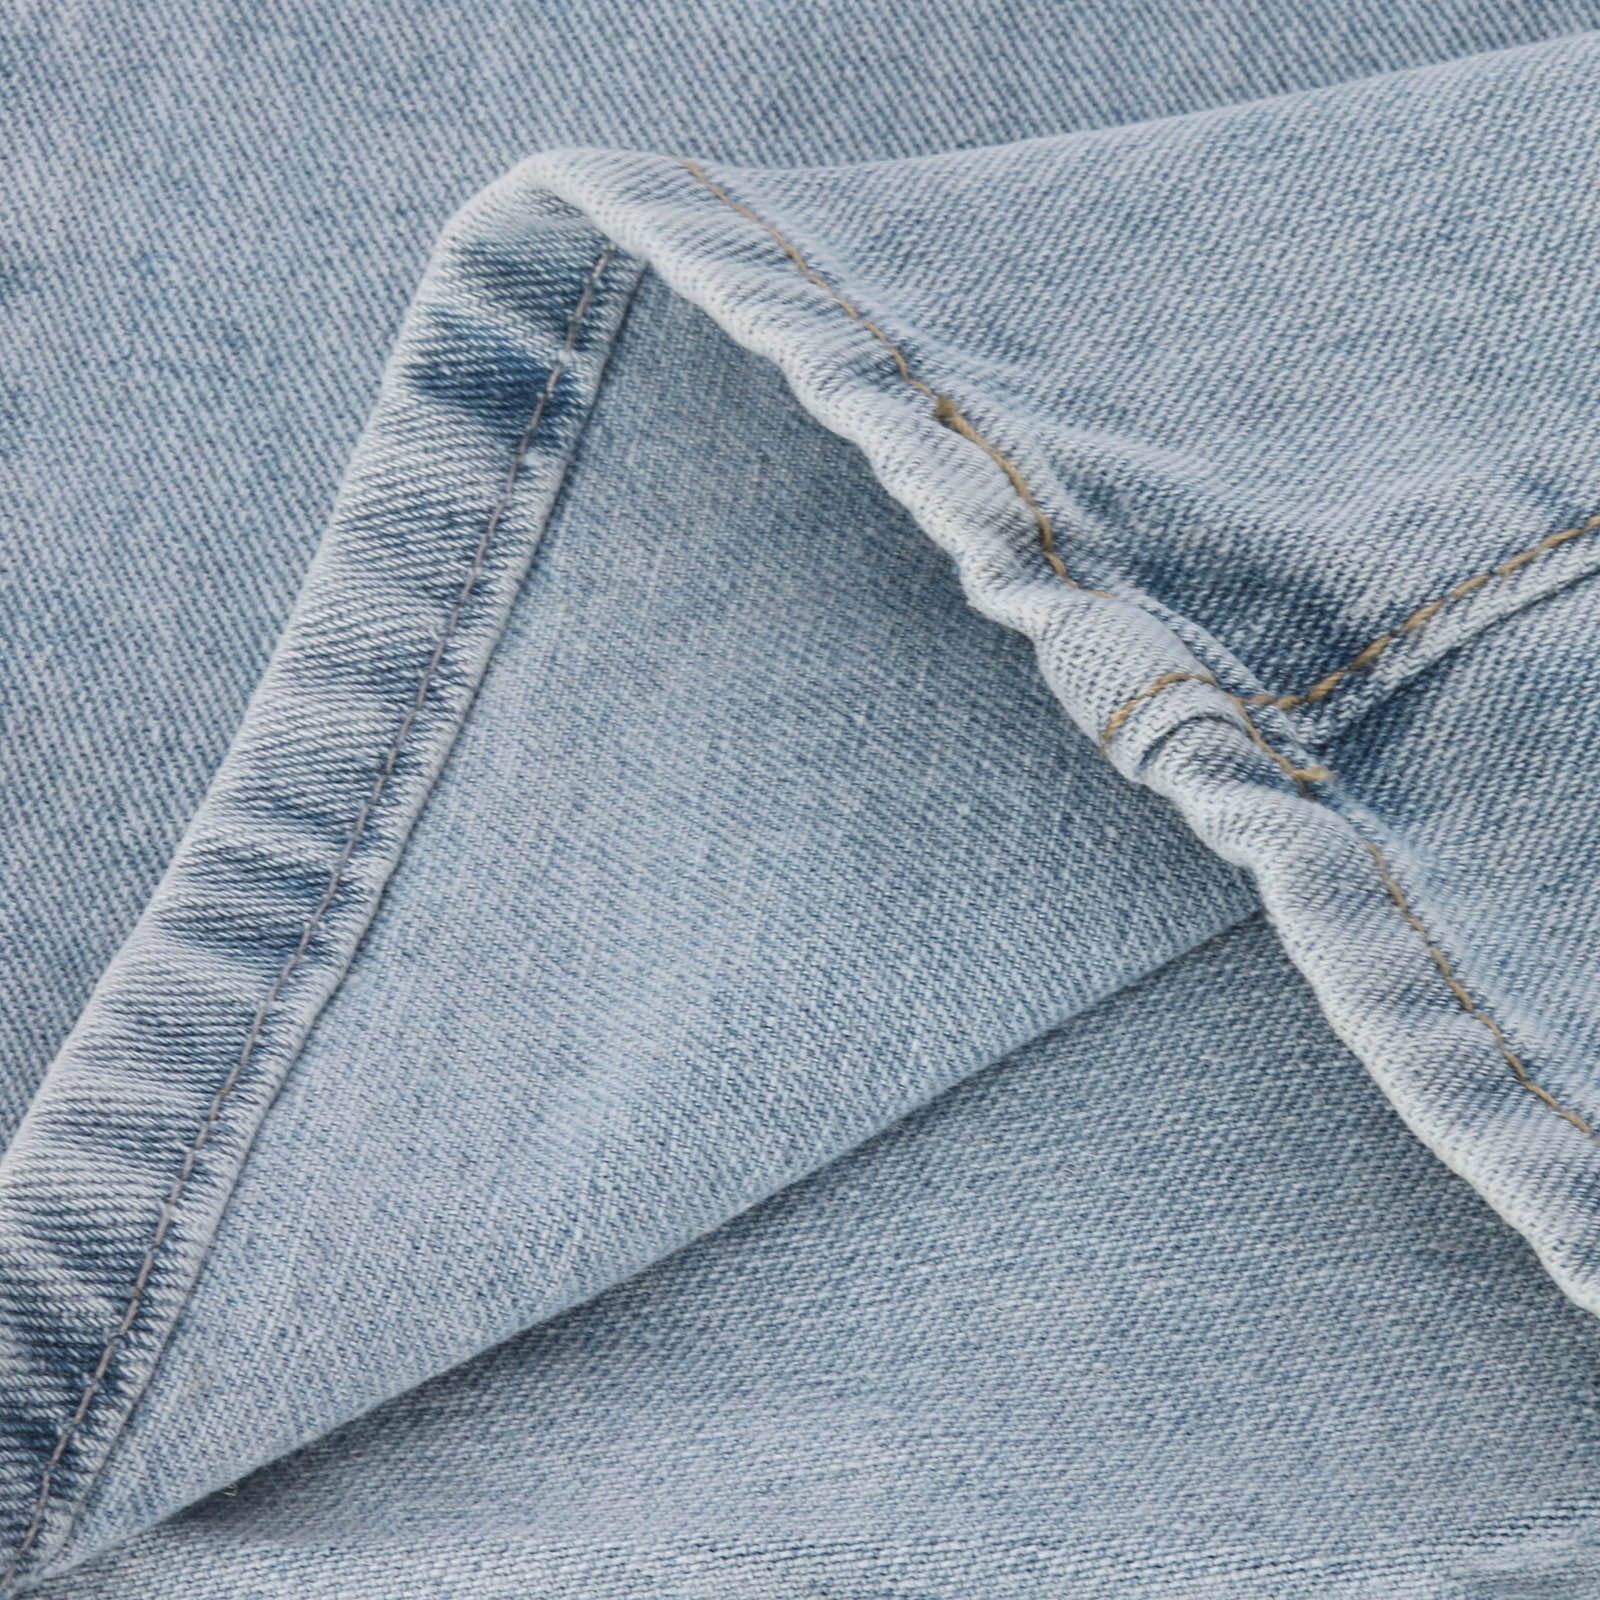 Light Shade 4oz Lightweight Washed Blue Denim Fabric by Metre - Etsy